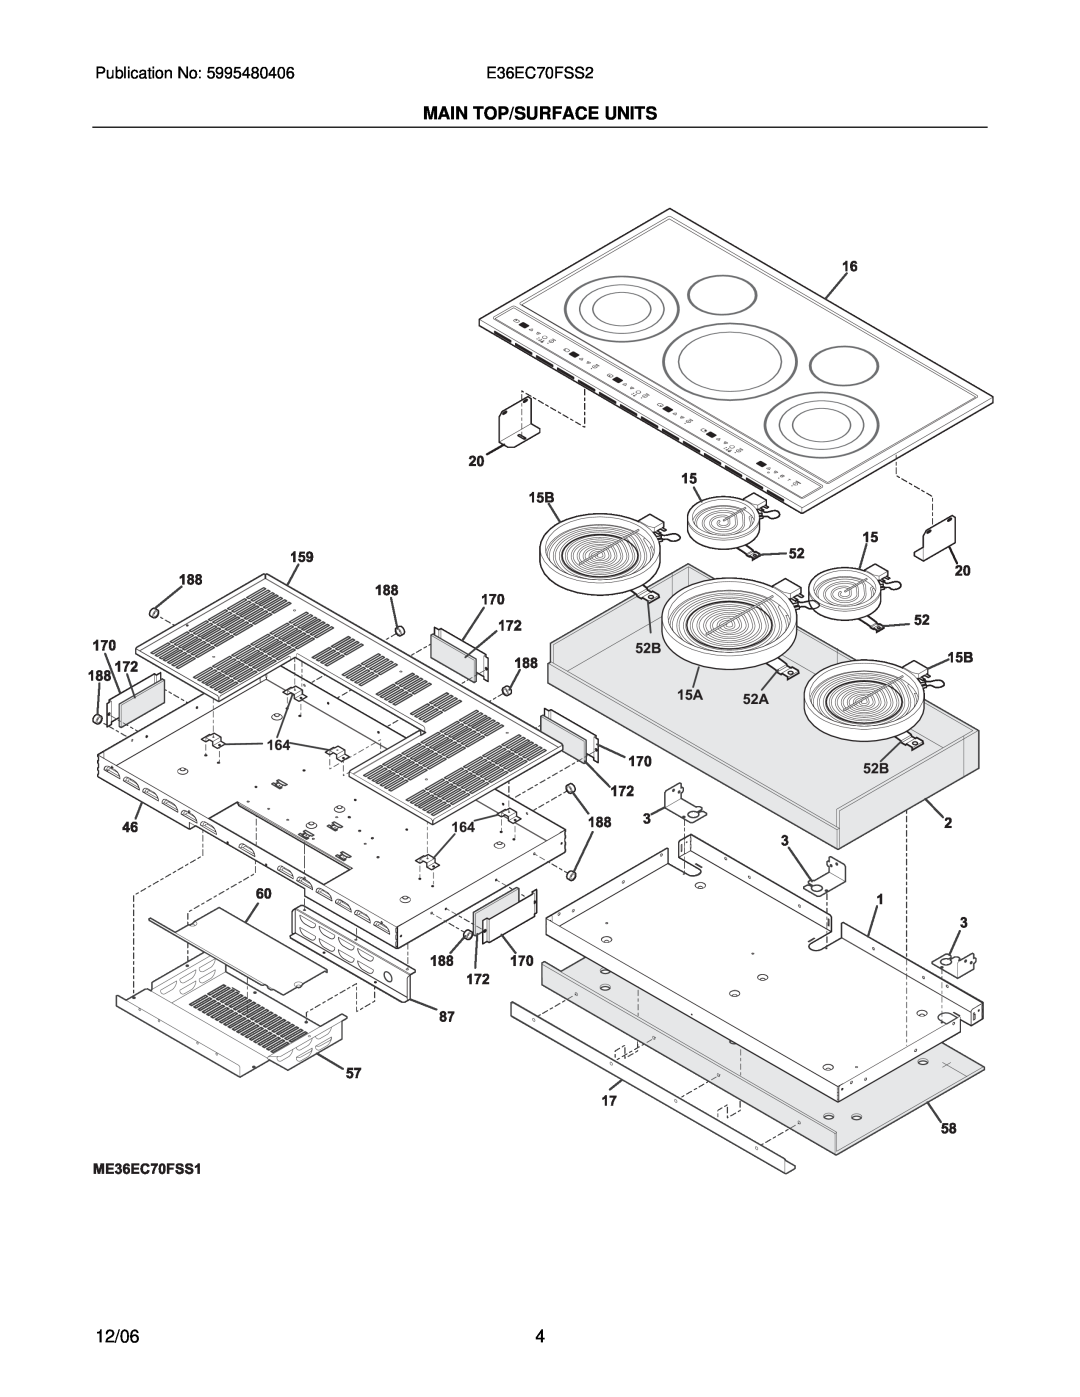 Electrolux E36EC70FSS2, 38066463760S2 installation instructions Main Top/Surface Units, 12/06 